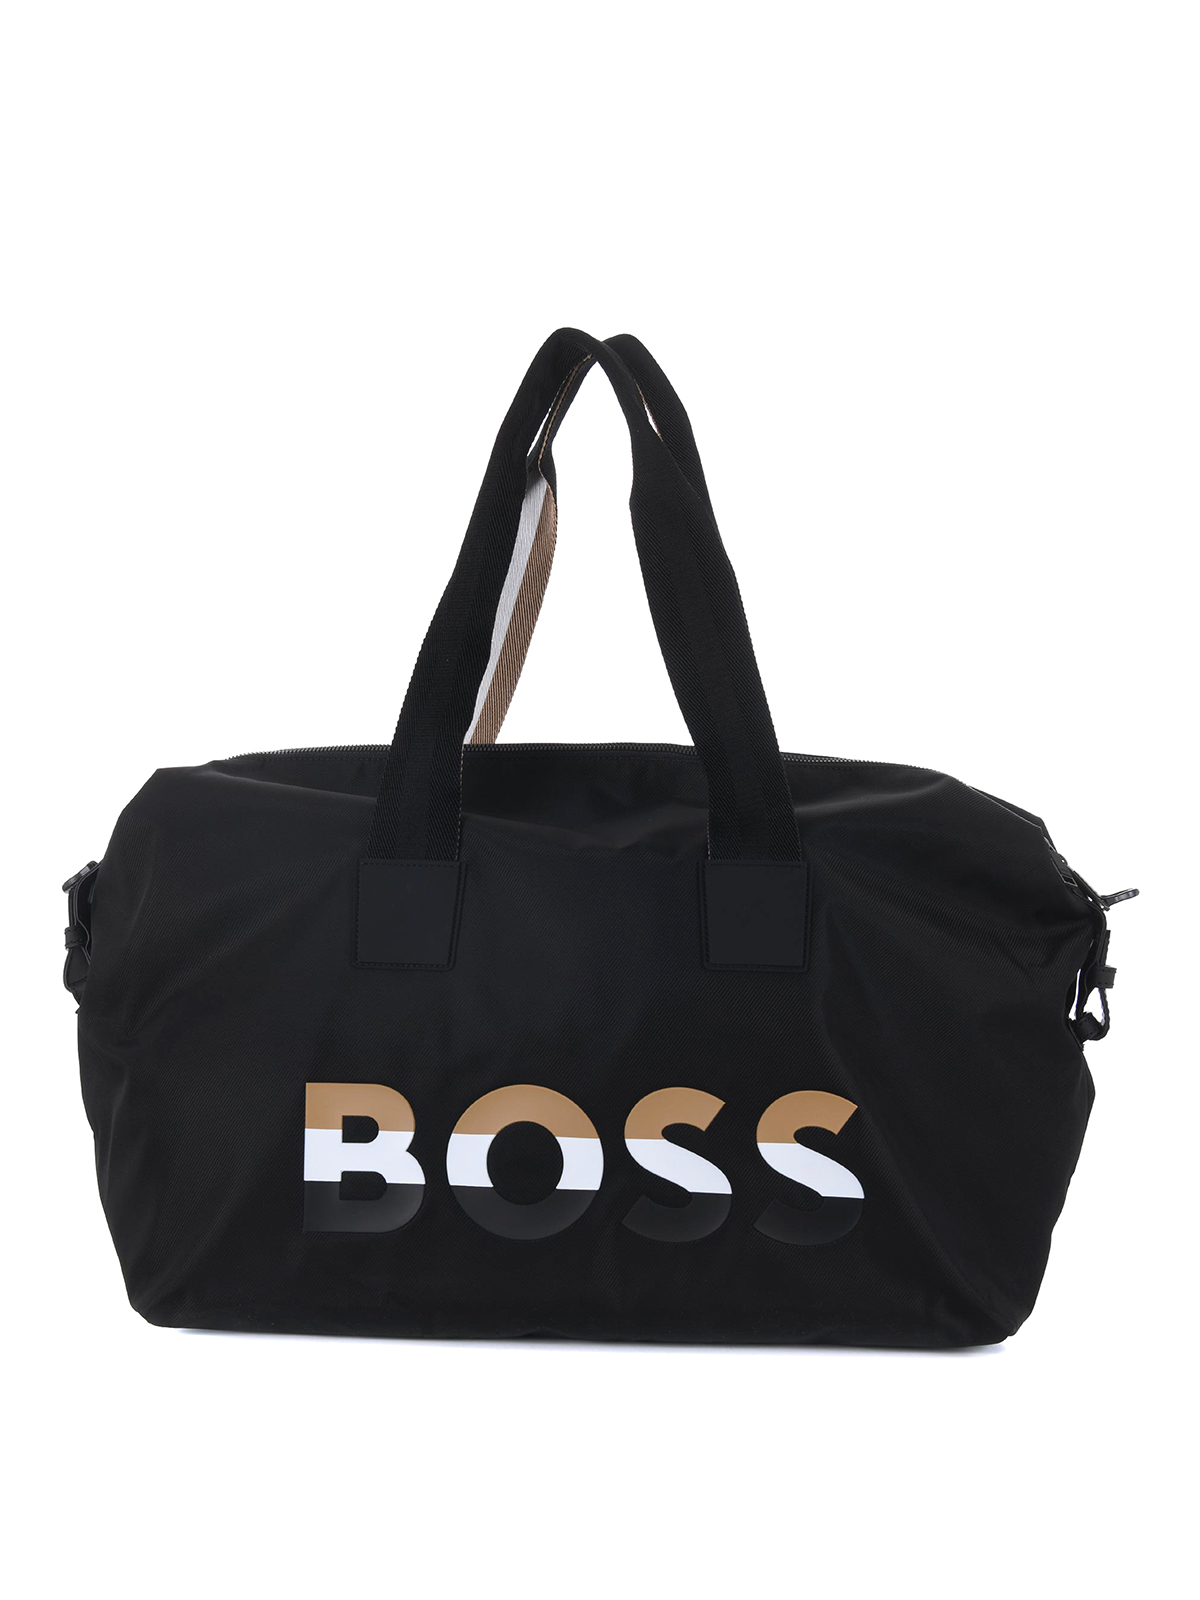 Luggage & Travel bags Hugo Boss - Duffle bag by - CATCH50492791001